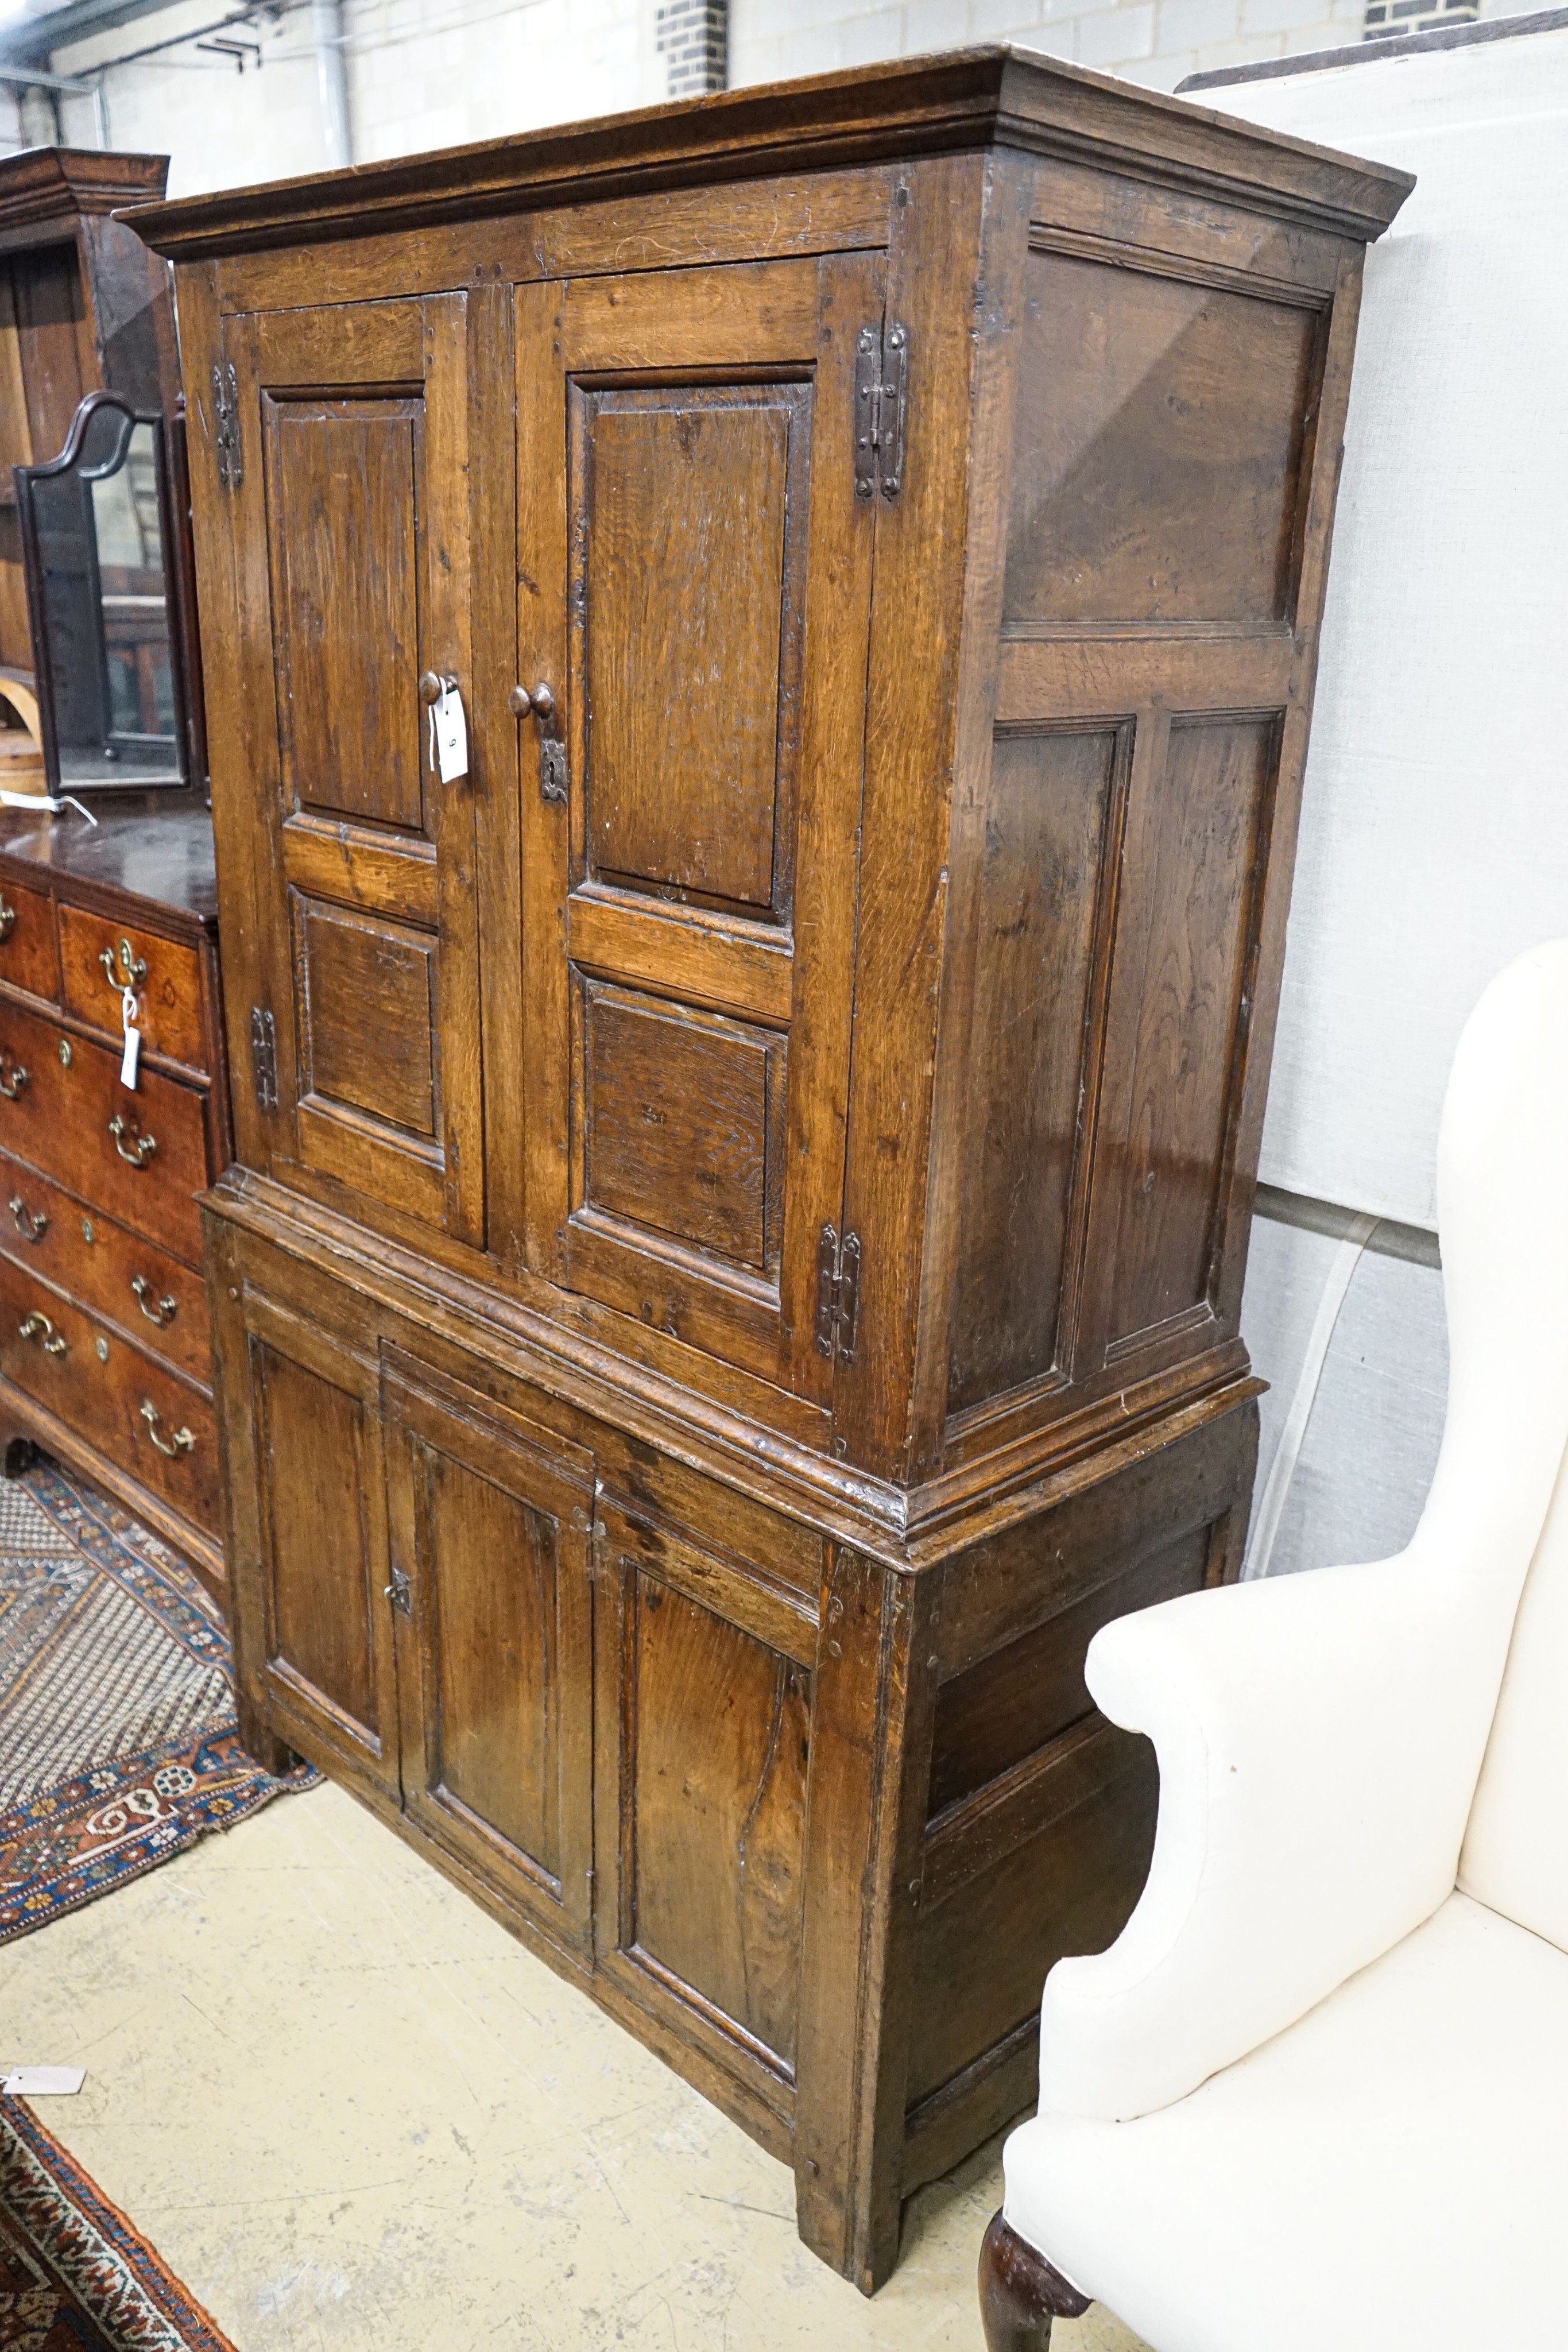 A 17th century style oak press cupboard, with three panelled doors, width 108cm, depth 50cm, height 172cm